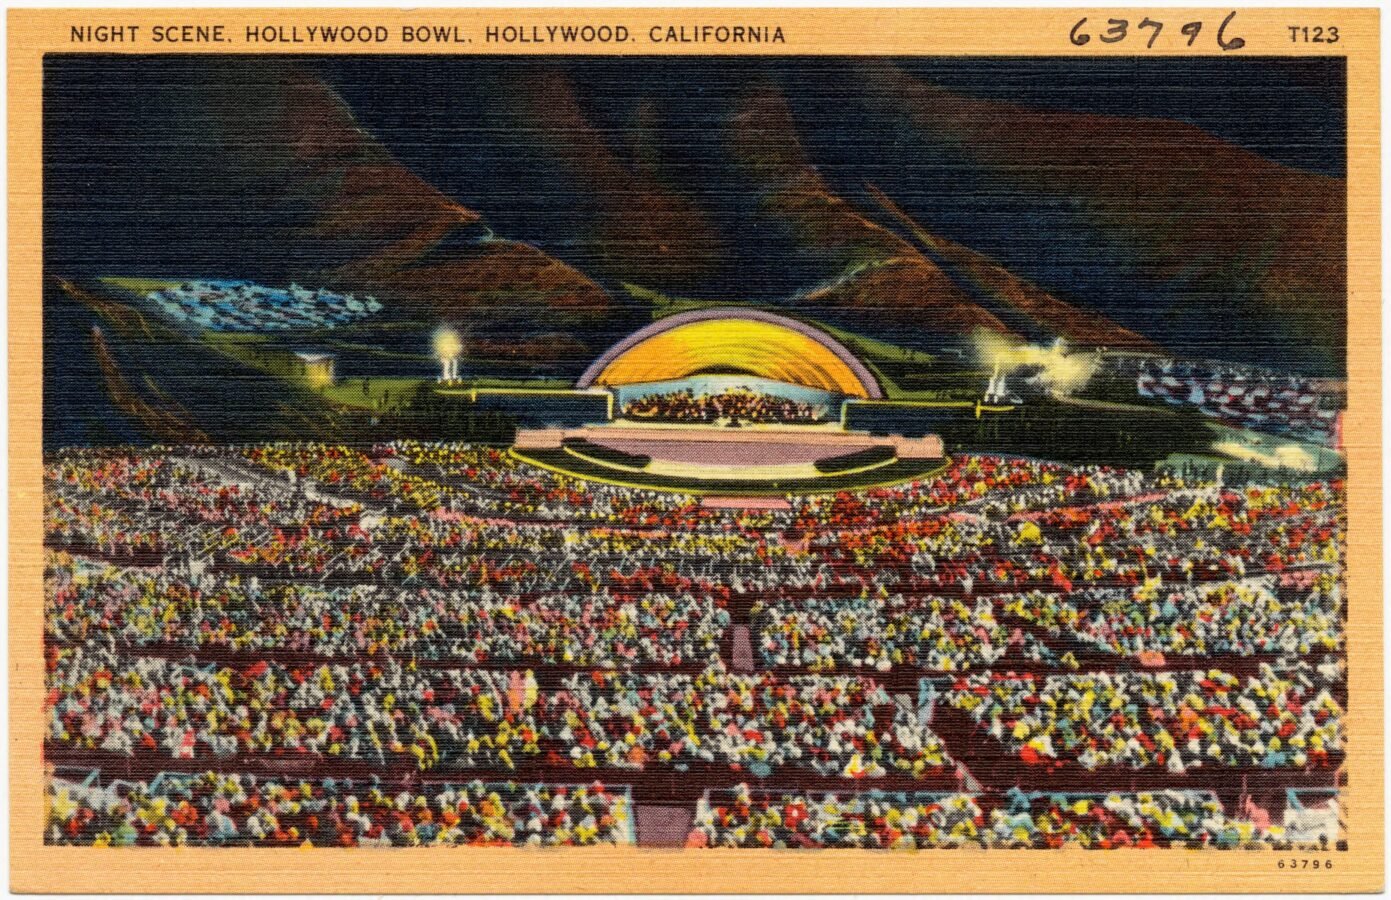 Night scene, Hollywood Bowl, Hollywood, California, between between circa 1930 and circa 1945 (Photo: Boston Public Library Tichnor Brothers collection)